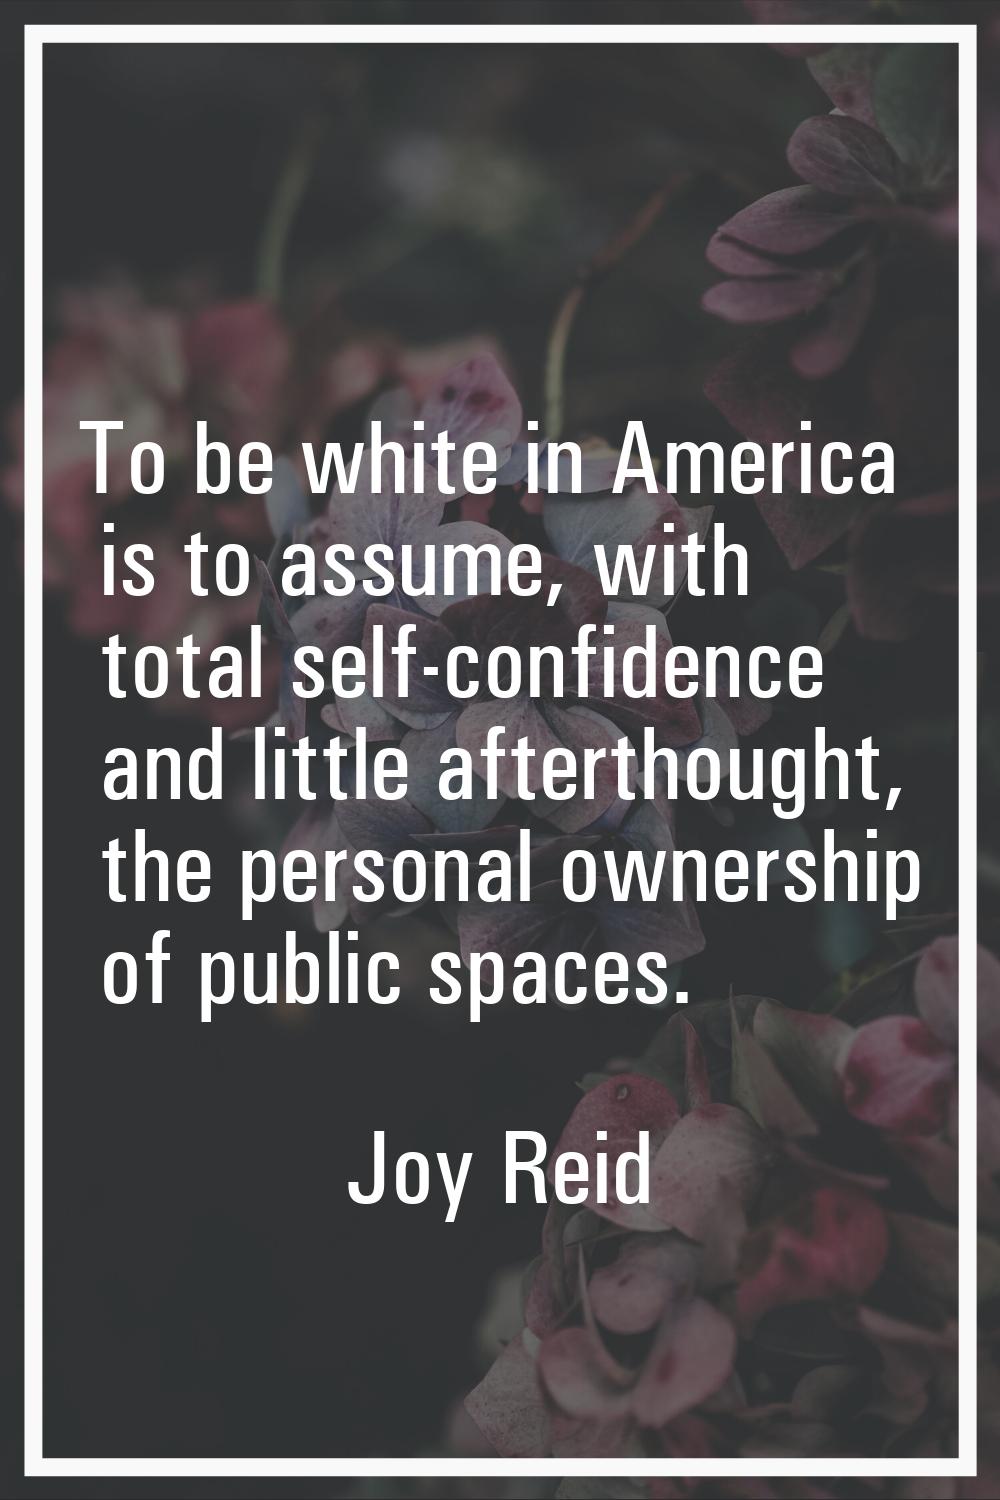 To be white in America is to assume, with total self-confidence and little afterthought, the person